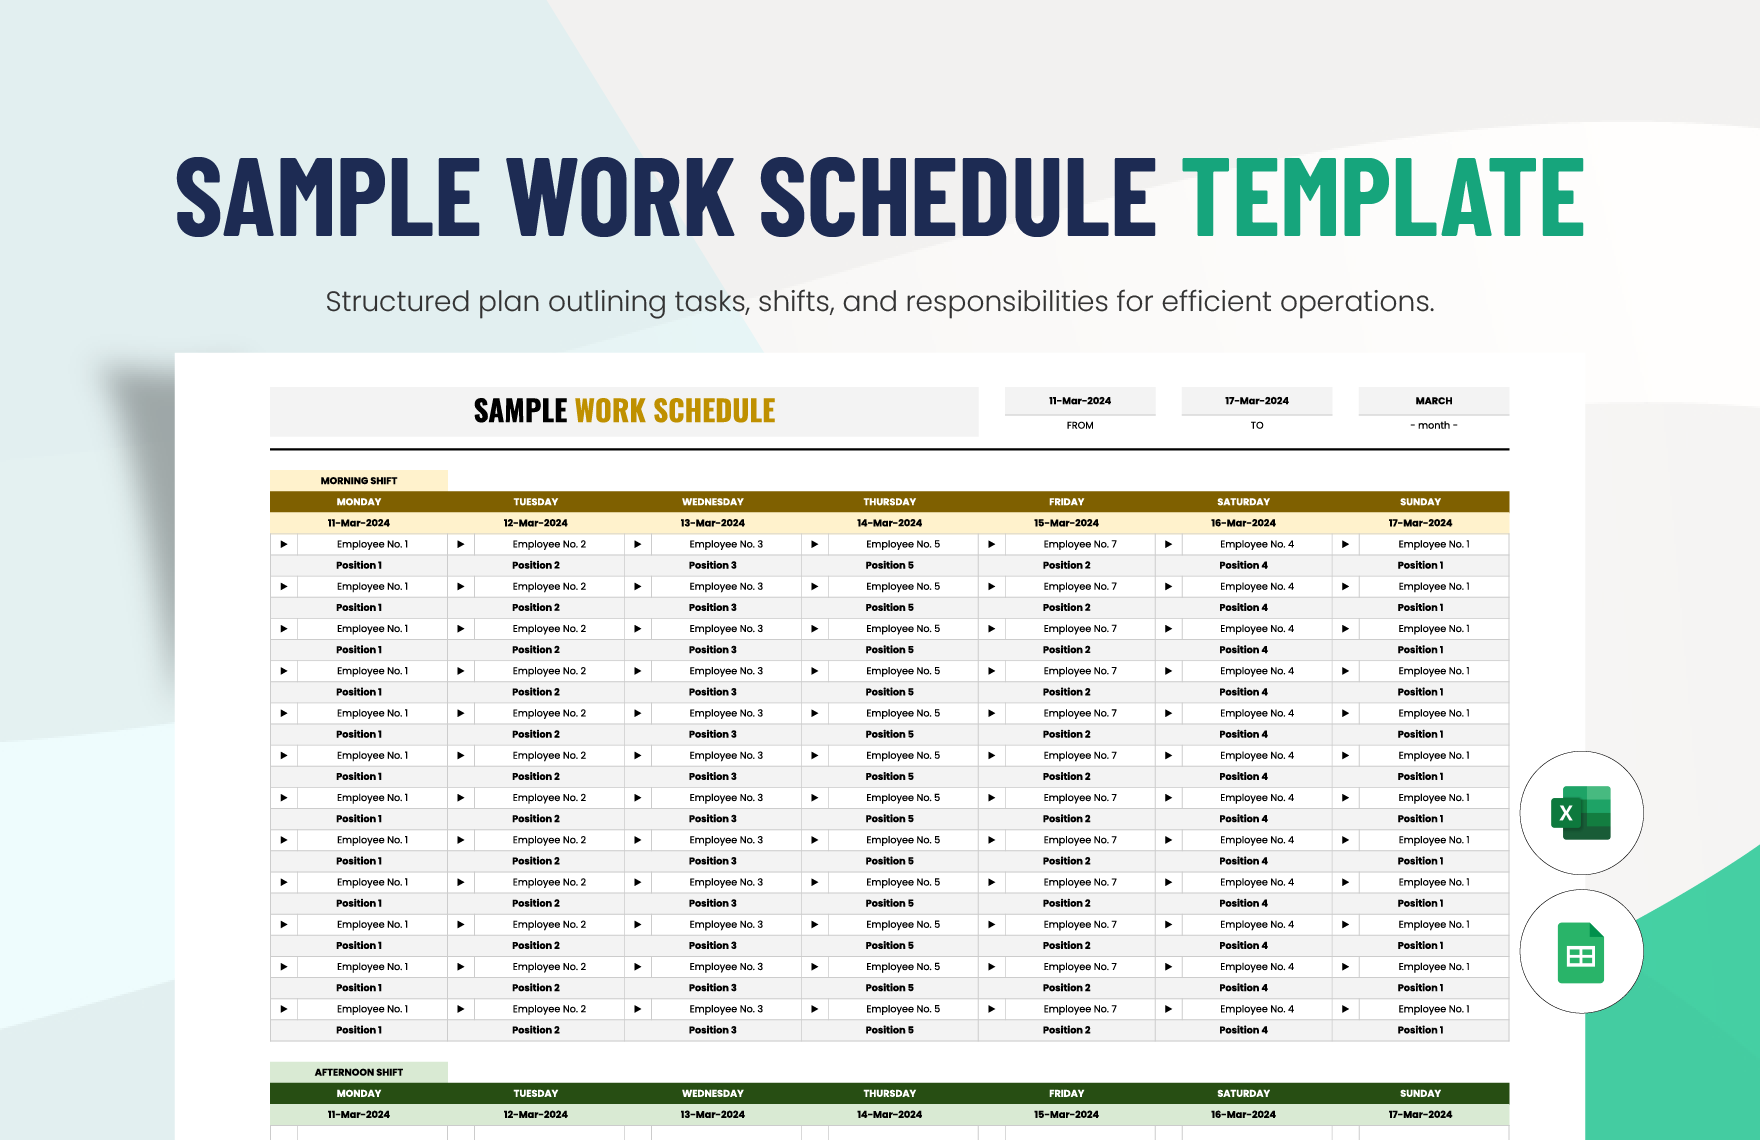 Sample Work Schedule Template in Excel, Google Sheets